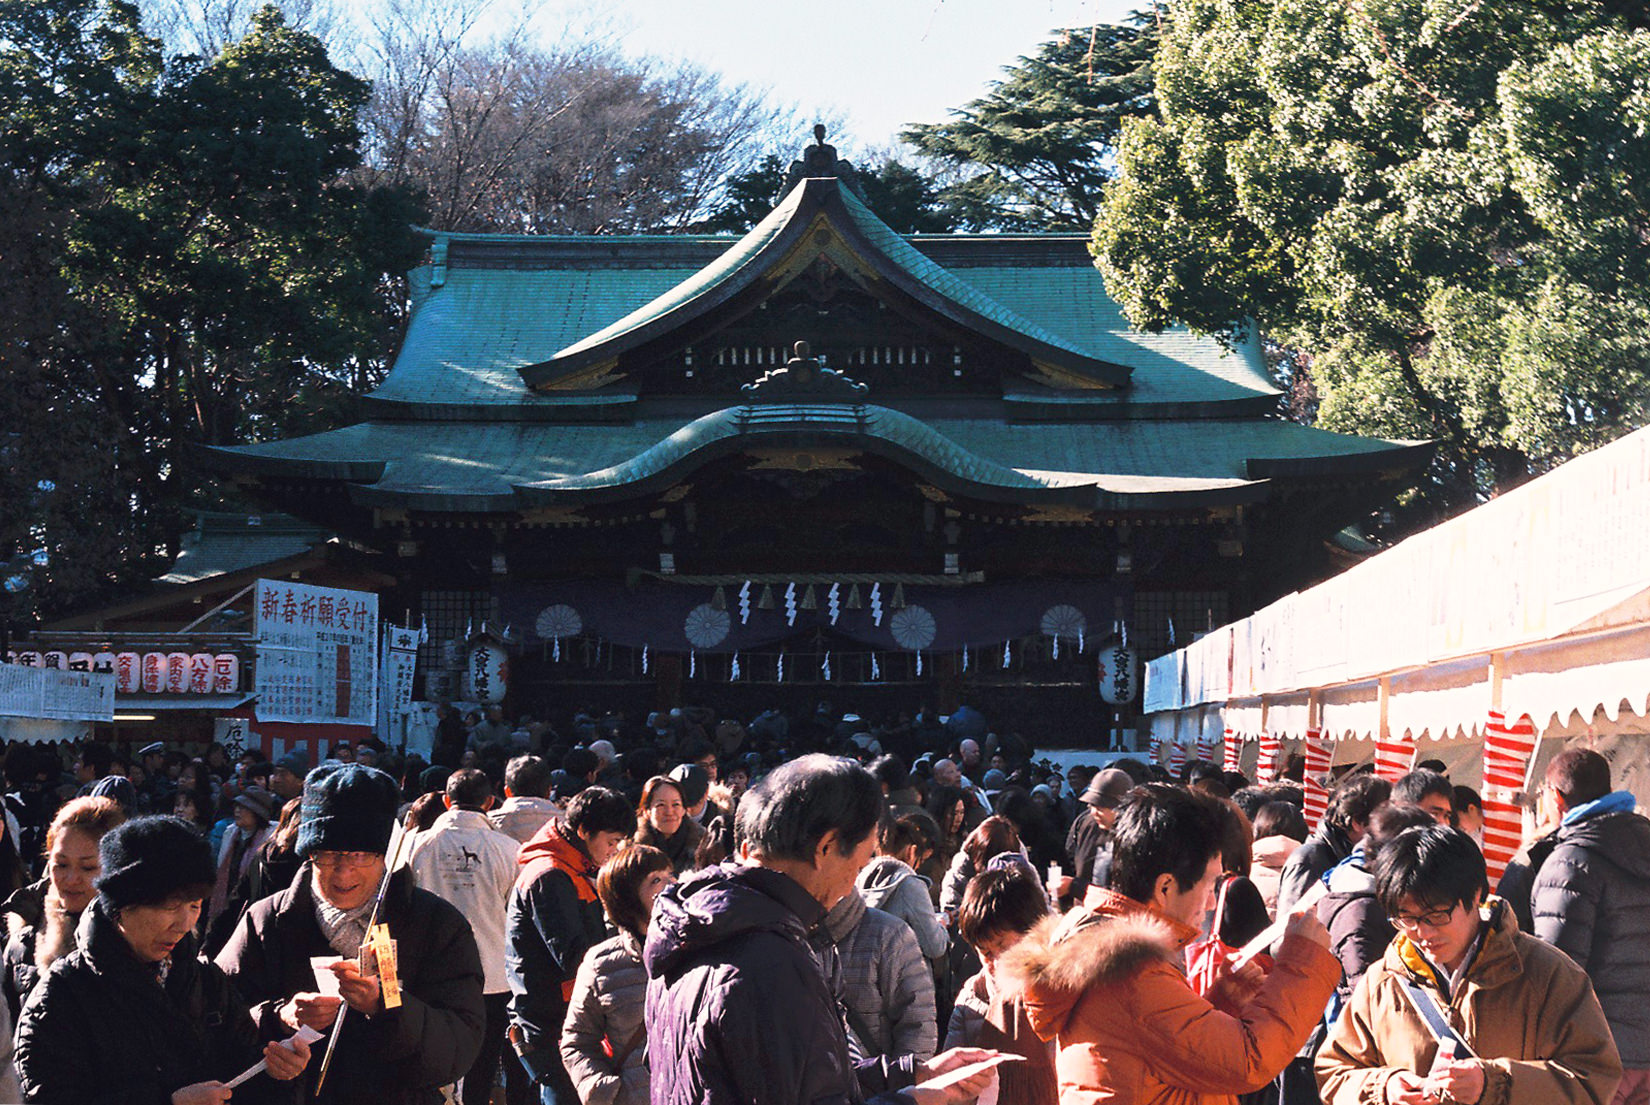 A photo of a crowd gathered at a Shinto shrine during Hatsumode.